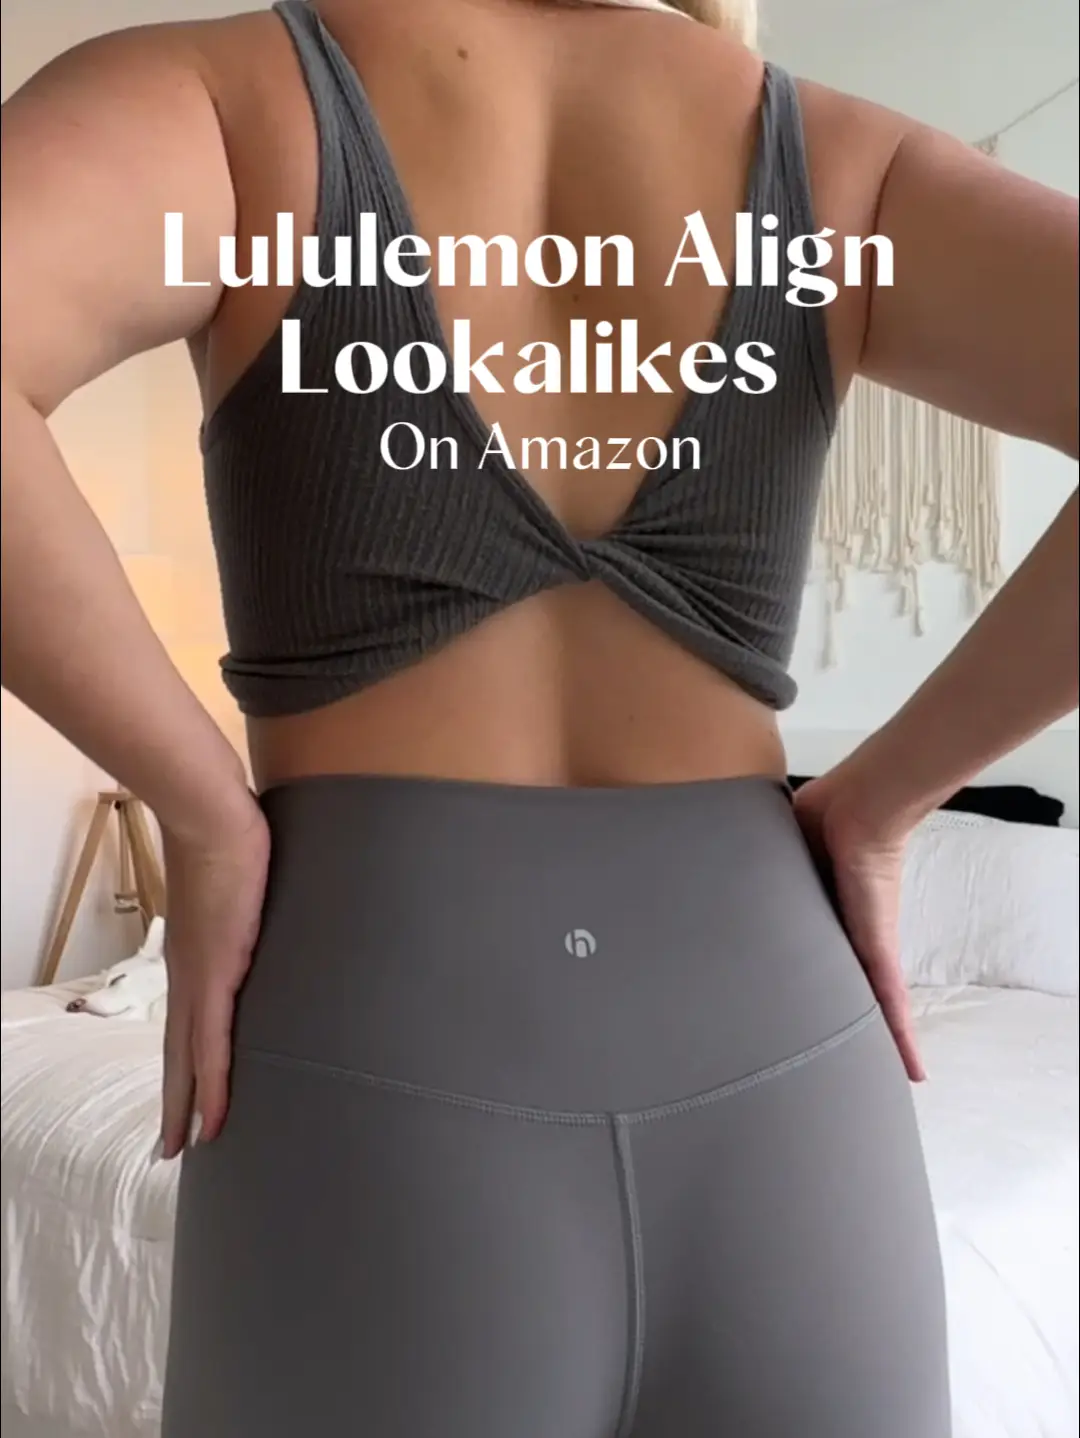 if you like lulu's softstreme, here's an excellent dupe from